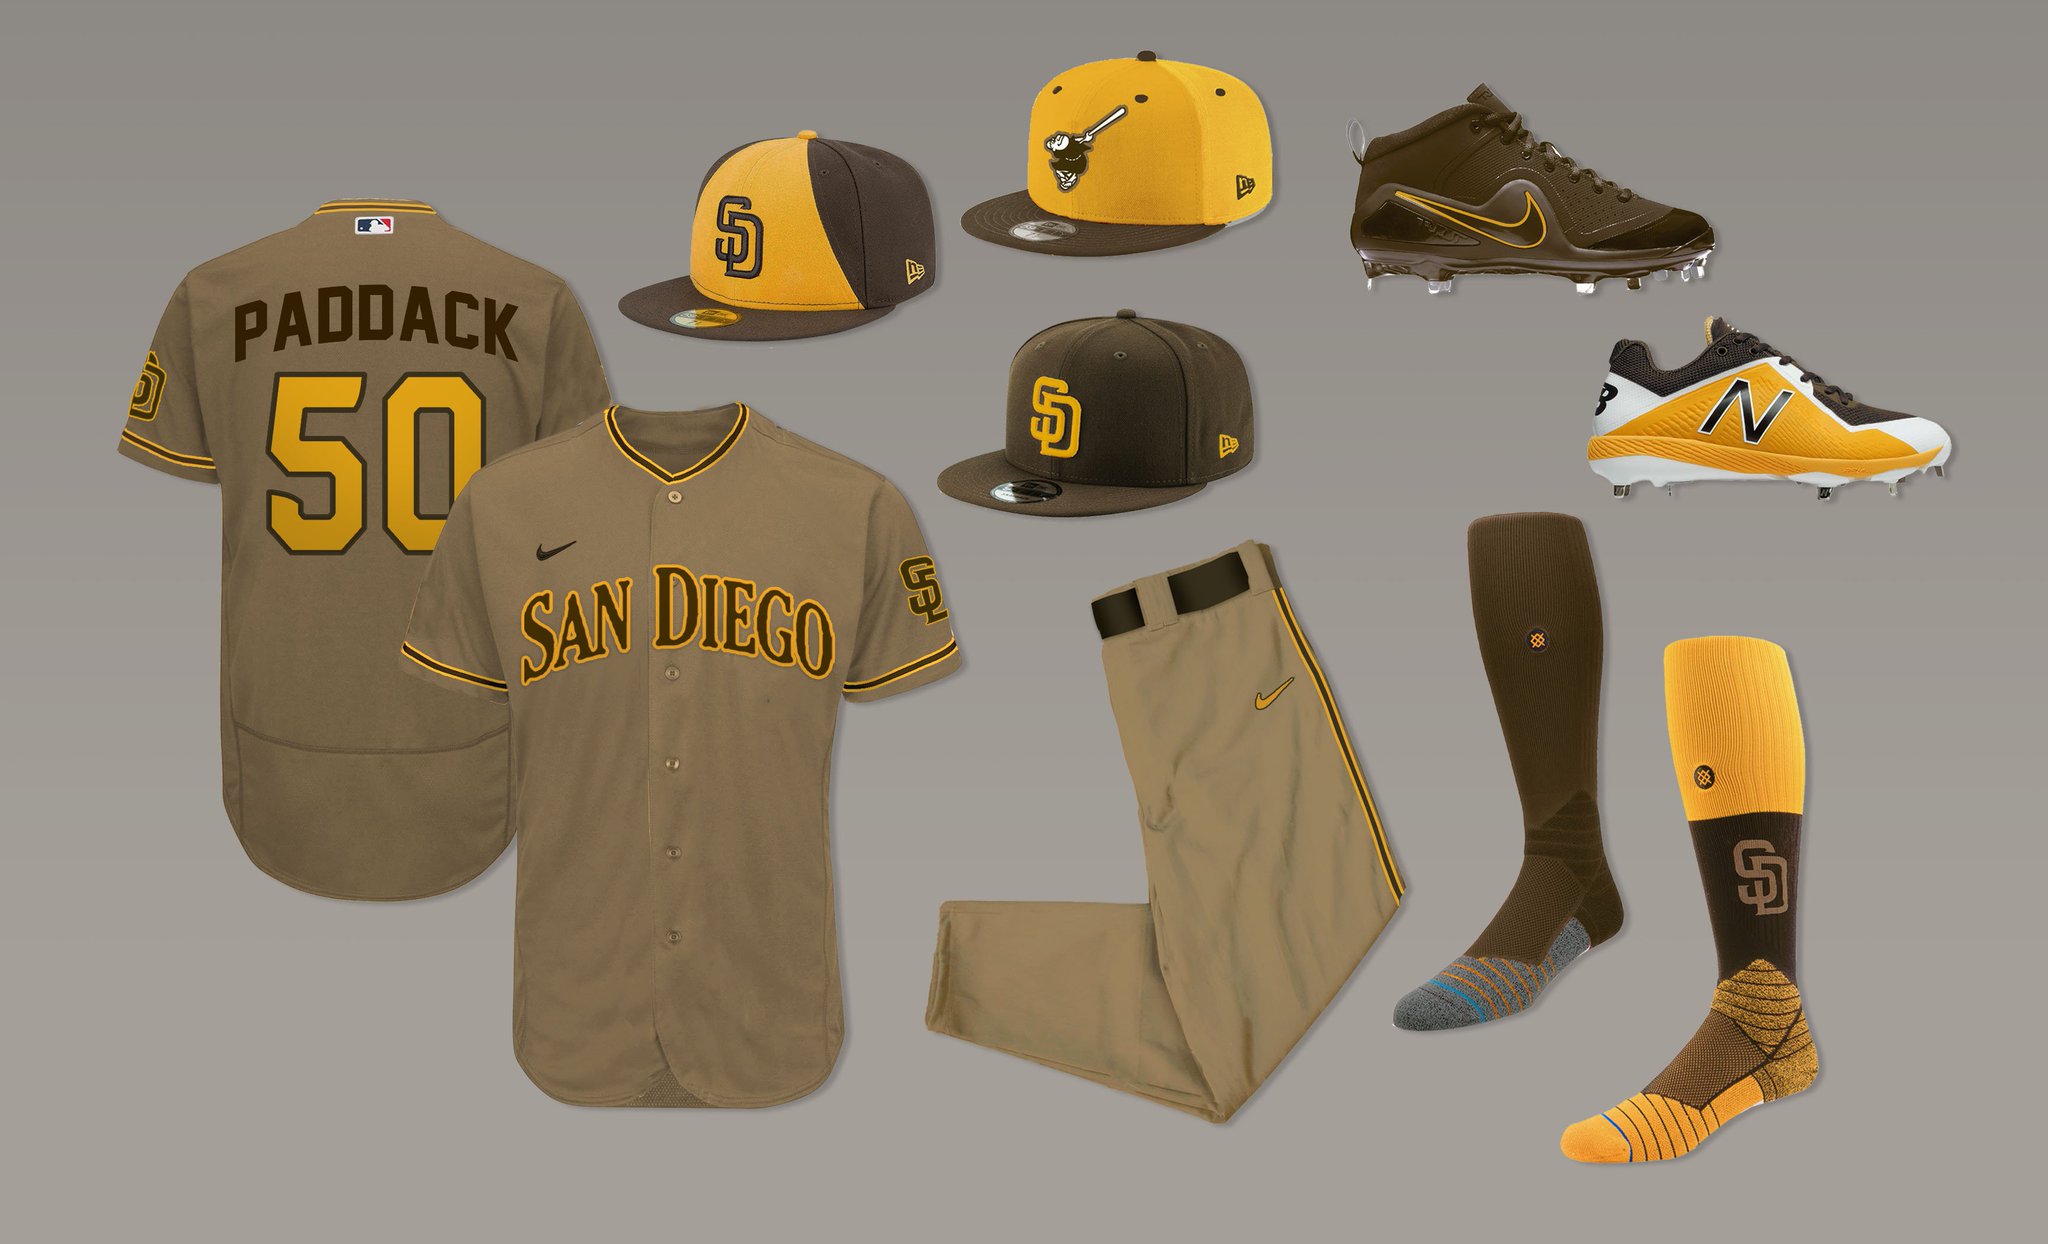 new padres uniforms for sale